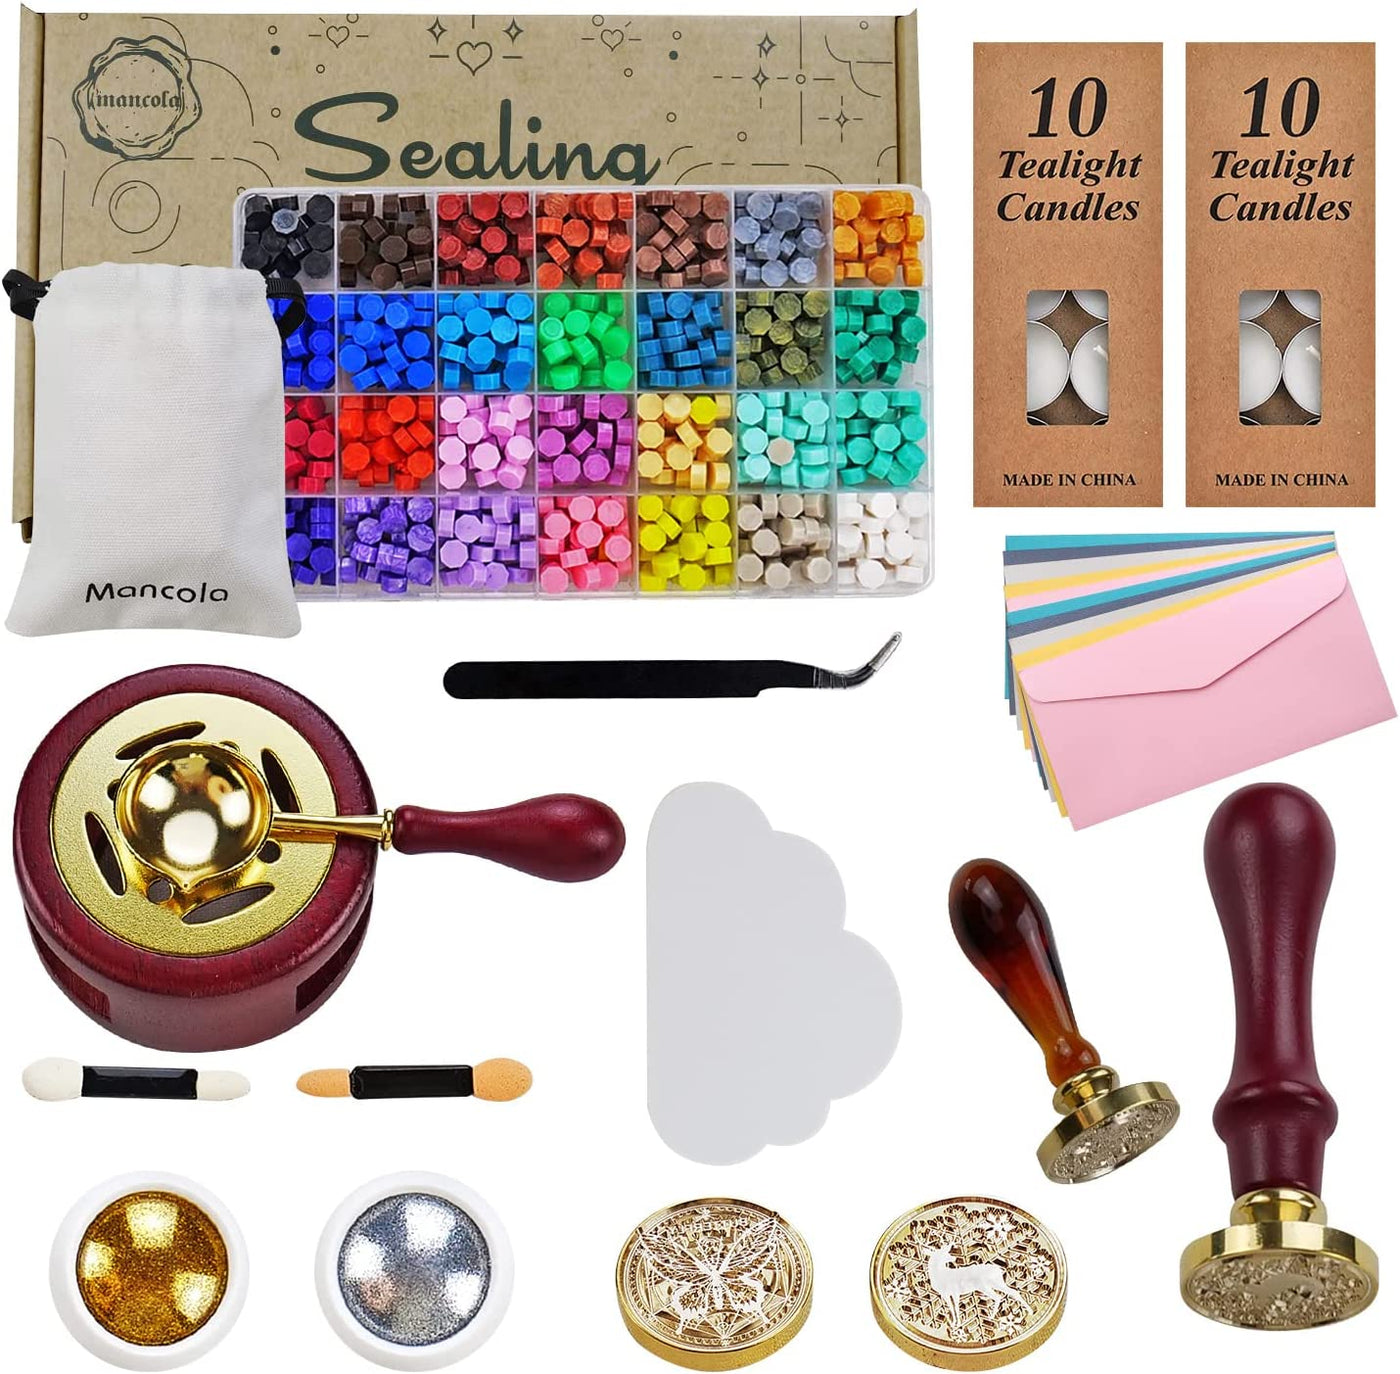 Mancola Wax Seal Stamp Kit with Gift Box, 28 Colors and 700 Pcs Wax Seal  Beads with Wax Seal Stamp, Sealing Wax Warmer, Wax Seal ,Golden and Silver  Power,Wax Seal Kit for